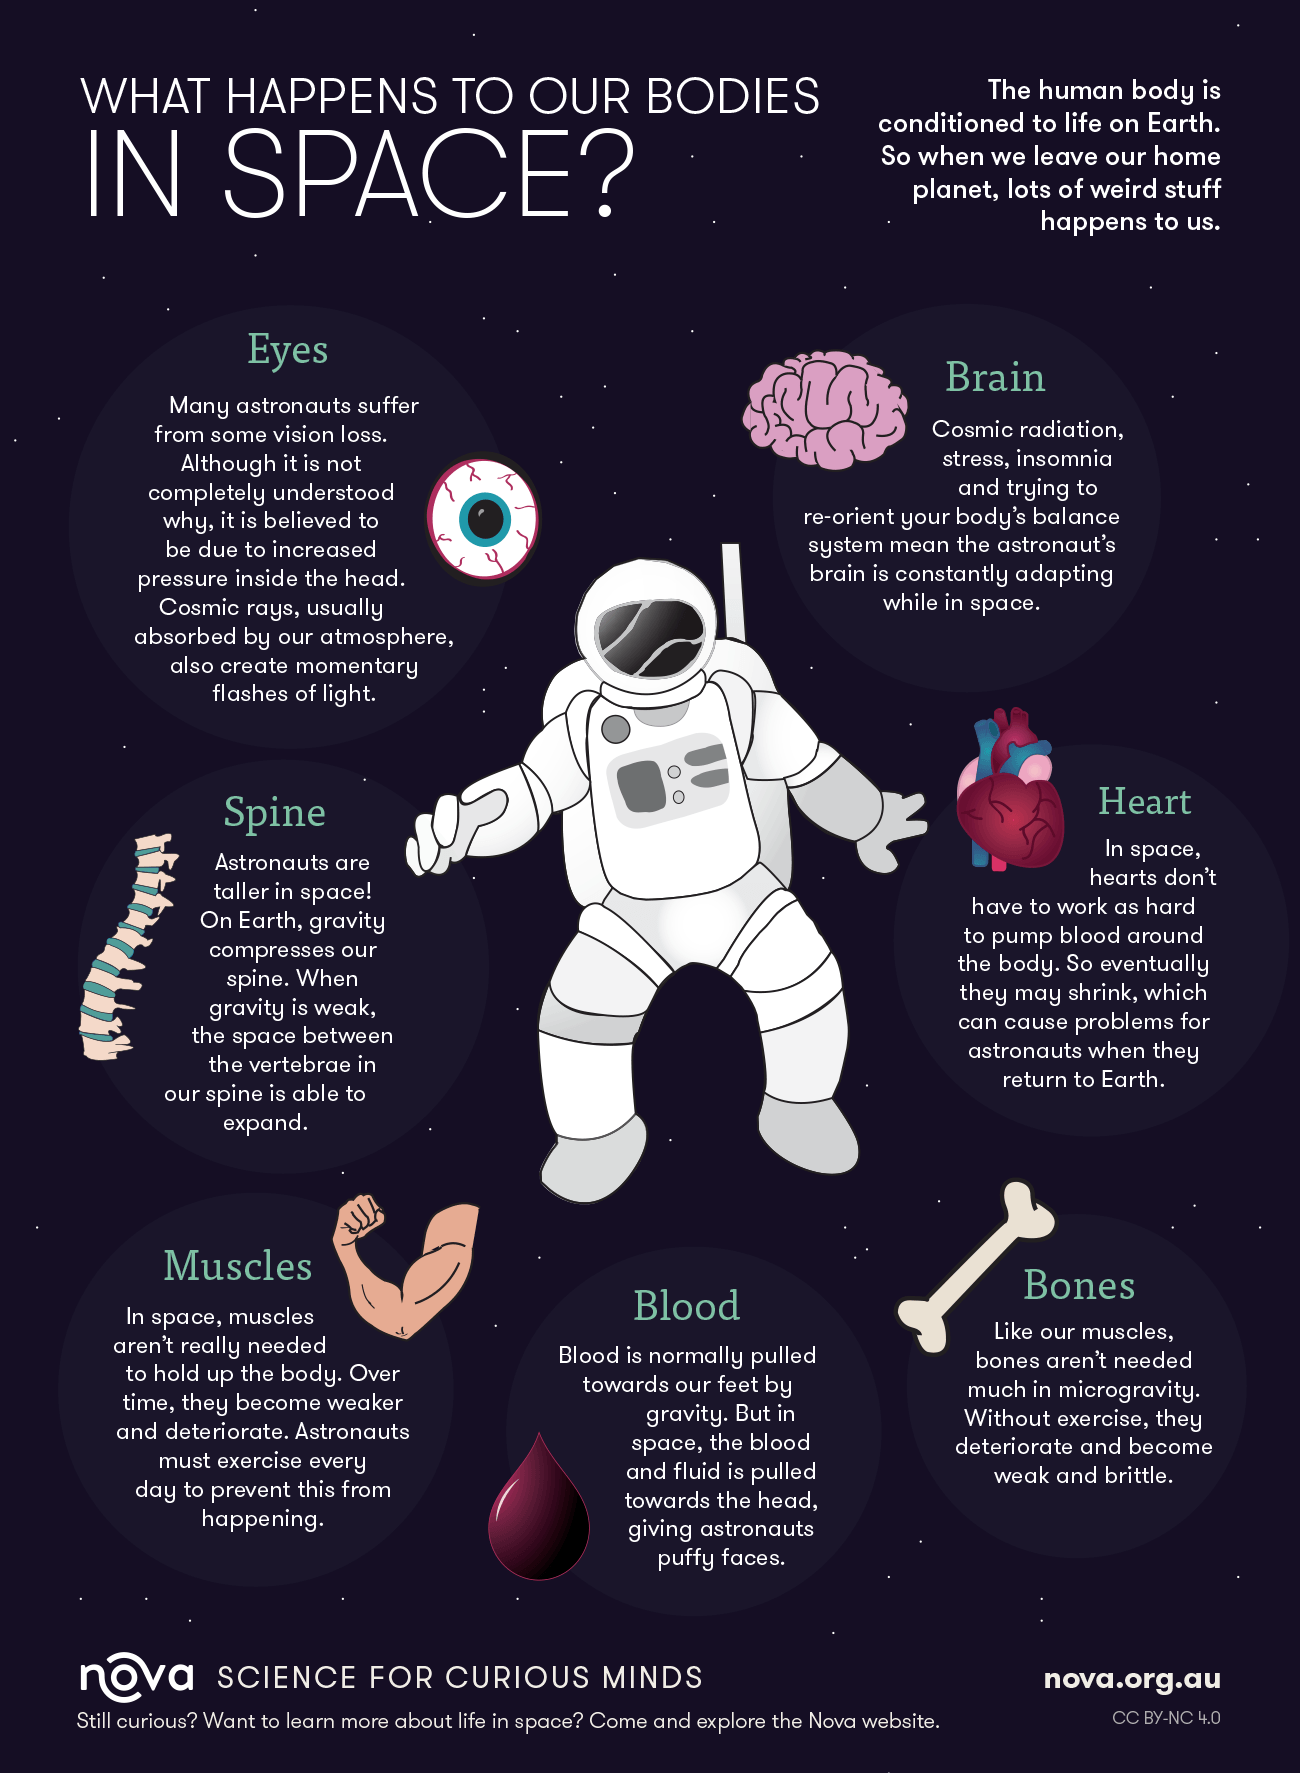 What Would Happen To A Dead Body In Space?